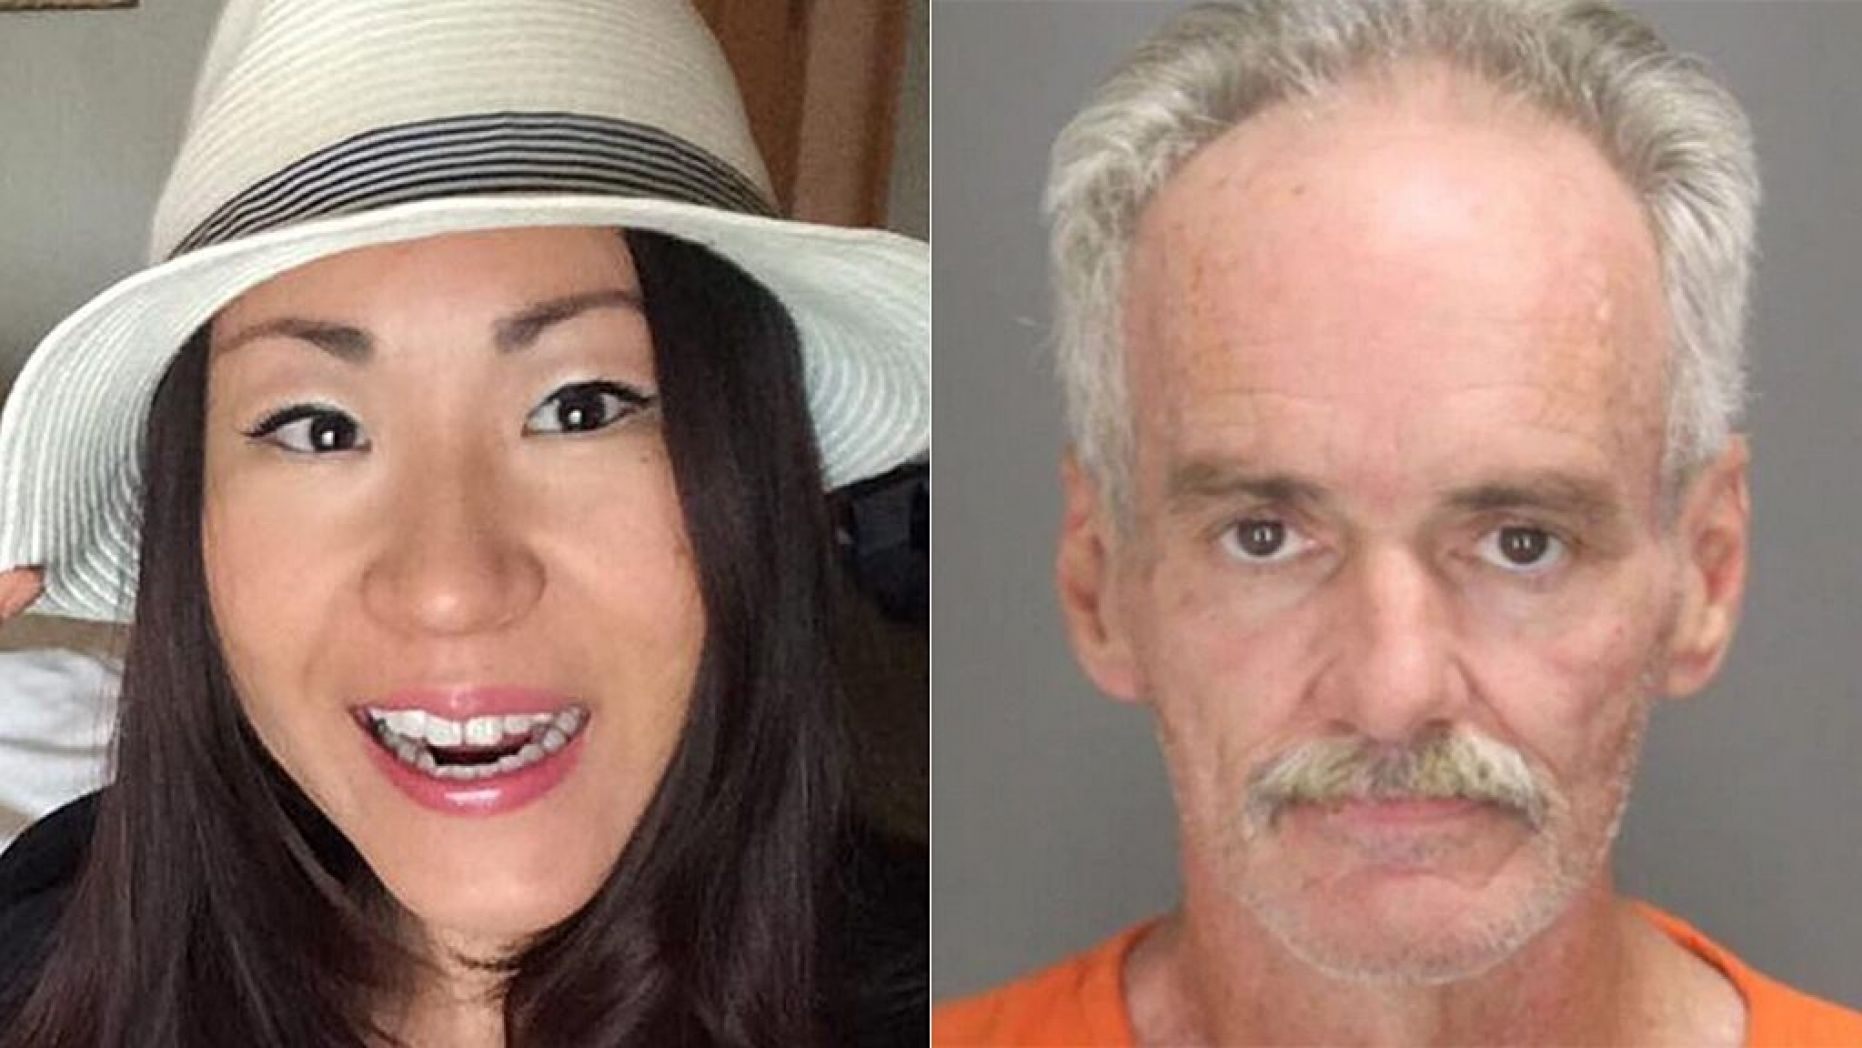 Jeffrey Bernard Morris is accused in the gruesome death of professional poker player Susie Zhao.